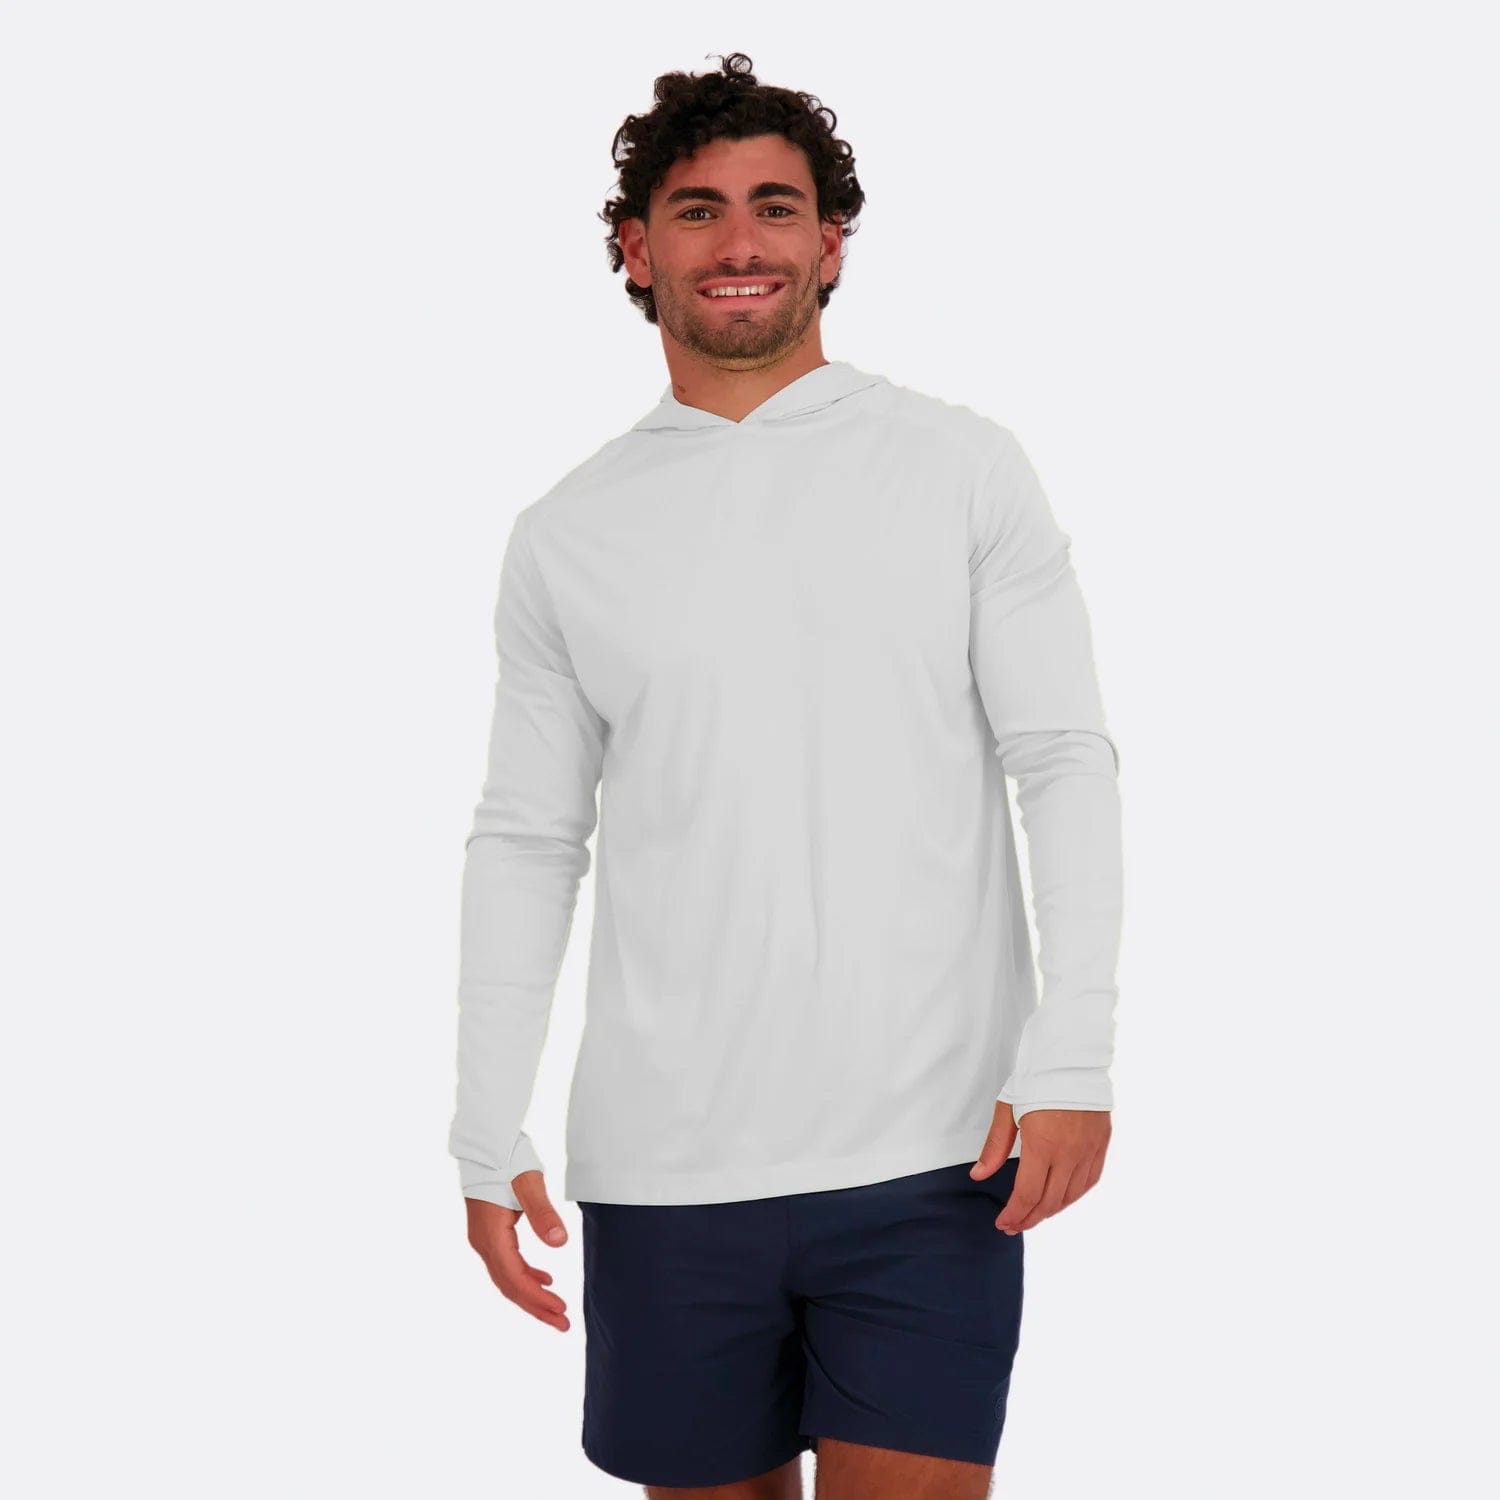 Hooded Performance Shirt, Sun Protection Clothing Men's